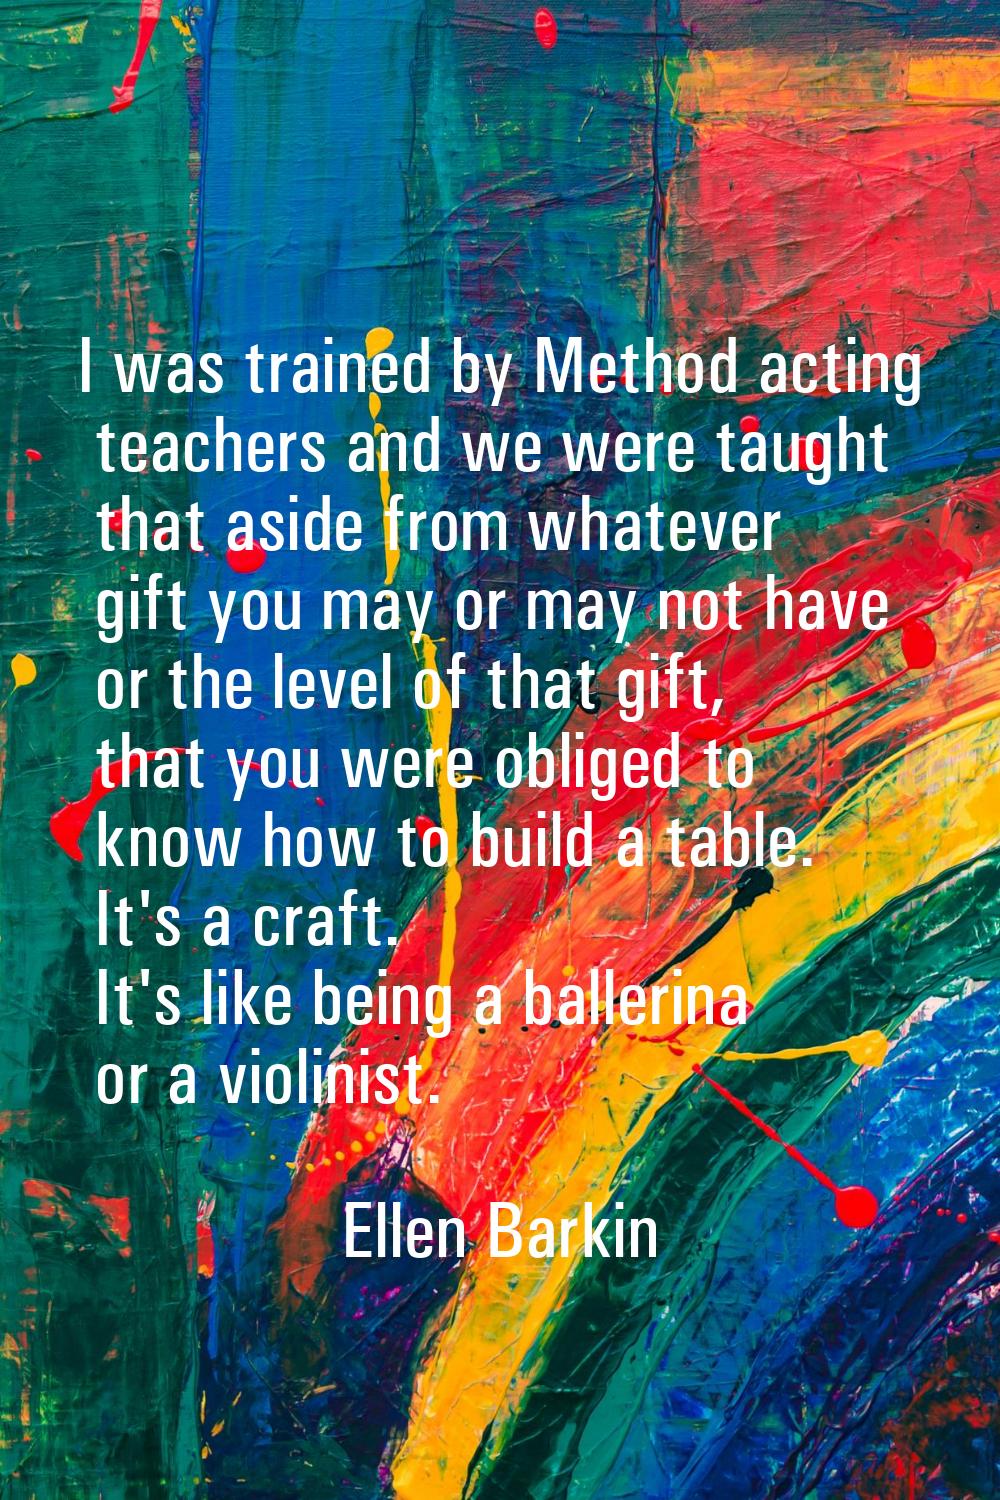 I was trained by Method acting teachers and we were taught that aside from whatever gift you may or